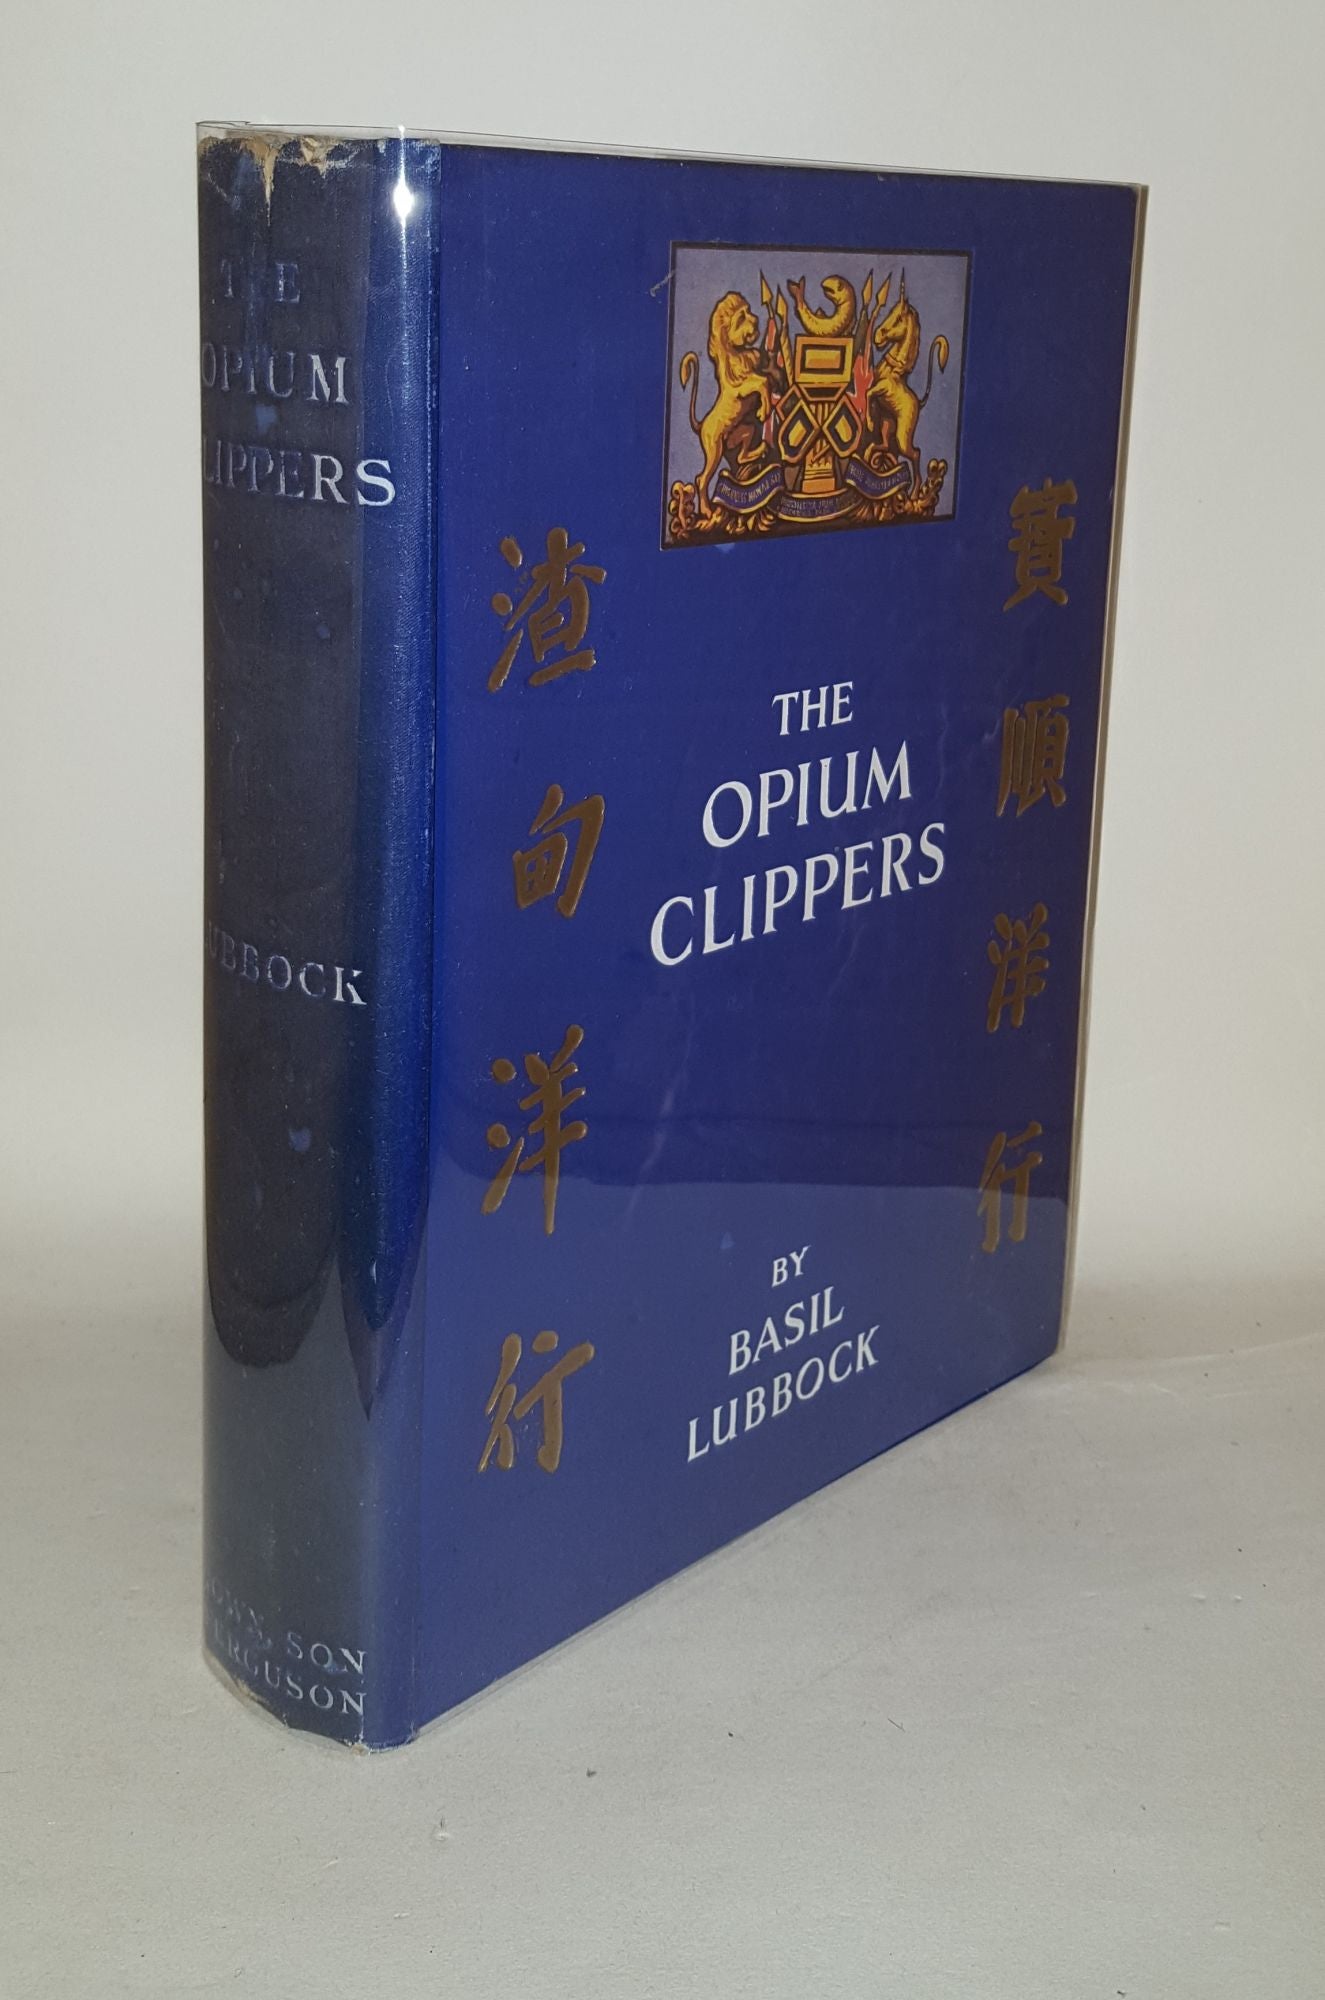 LUBBOCK Basil - The Opium Clippers